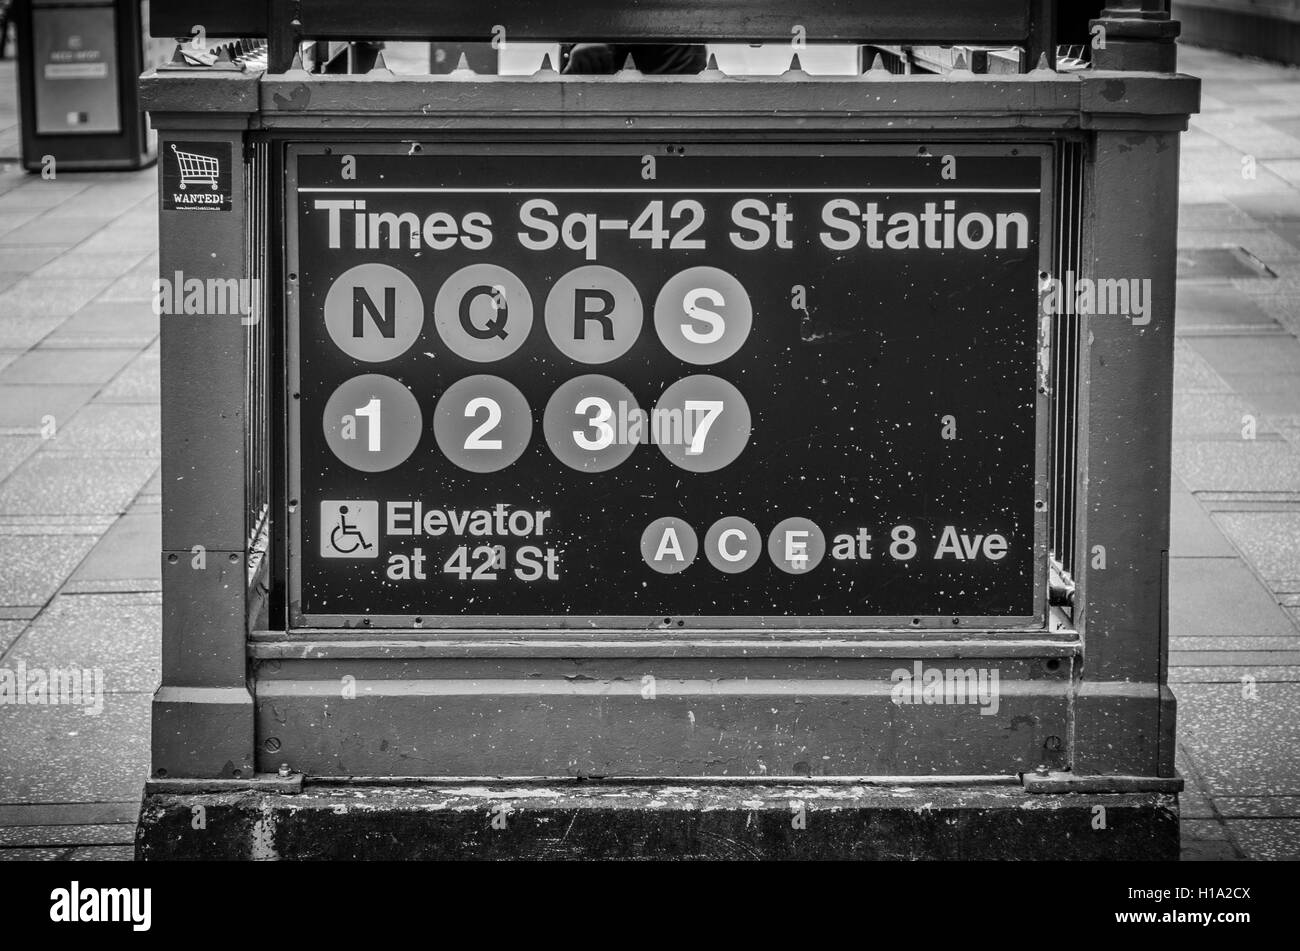 The Times Sq / 42 St Station SIgn in New York City Stock Photo